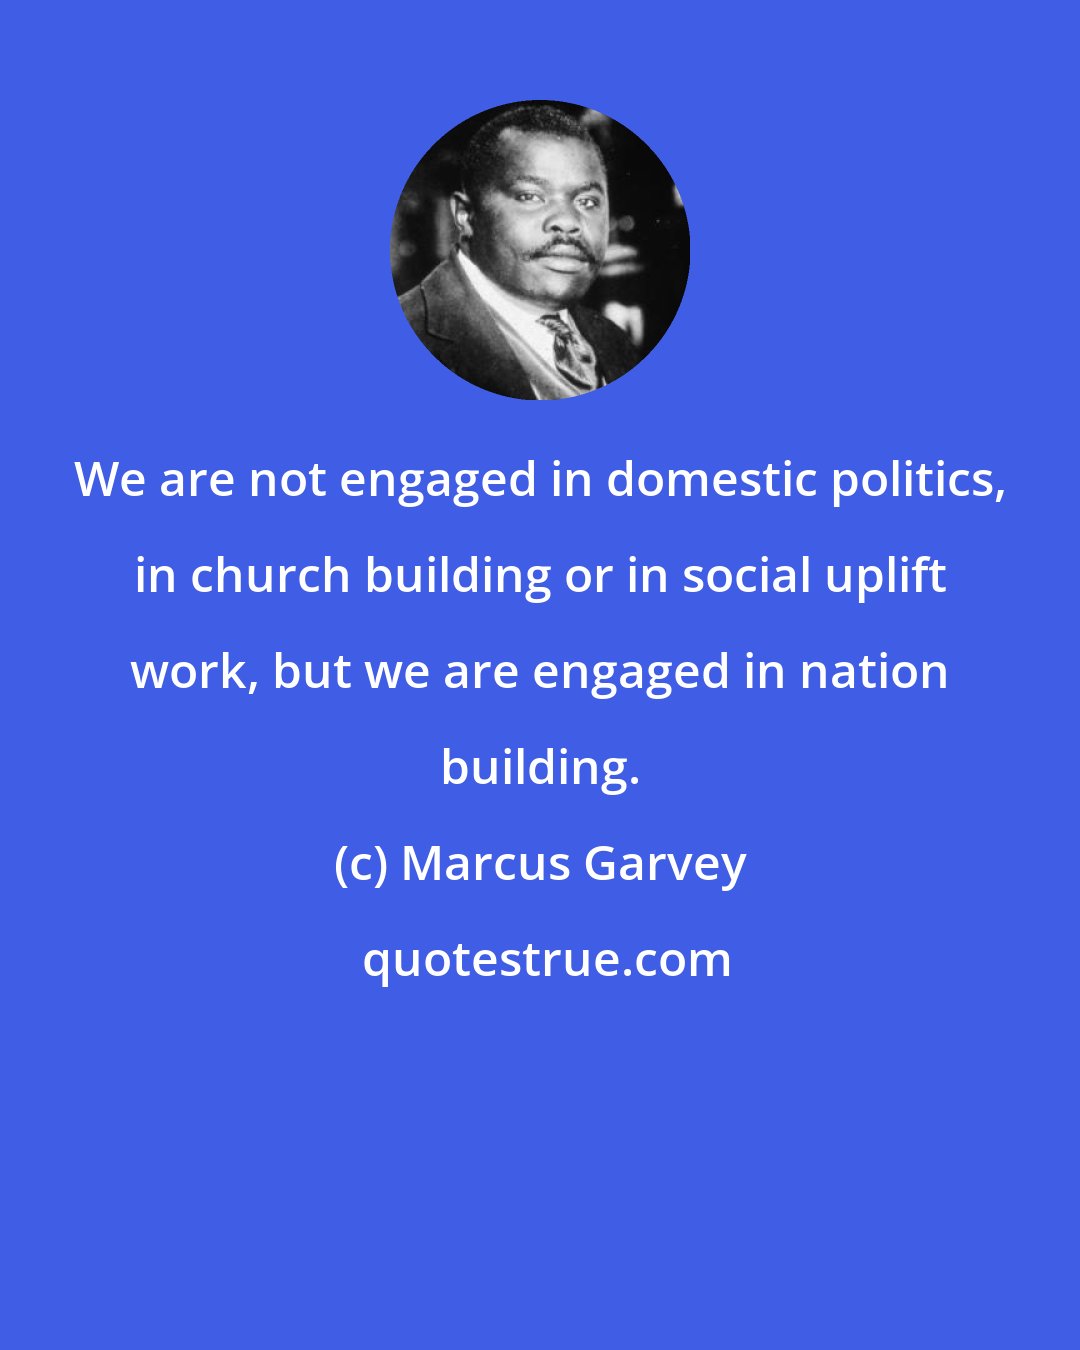 Marcus Garvey: We are not engaged in domestic politics, in church building or in social uplift work, but we are engaged in nation building.